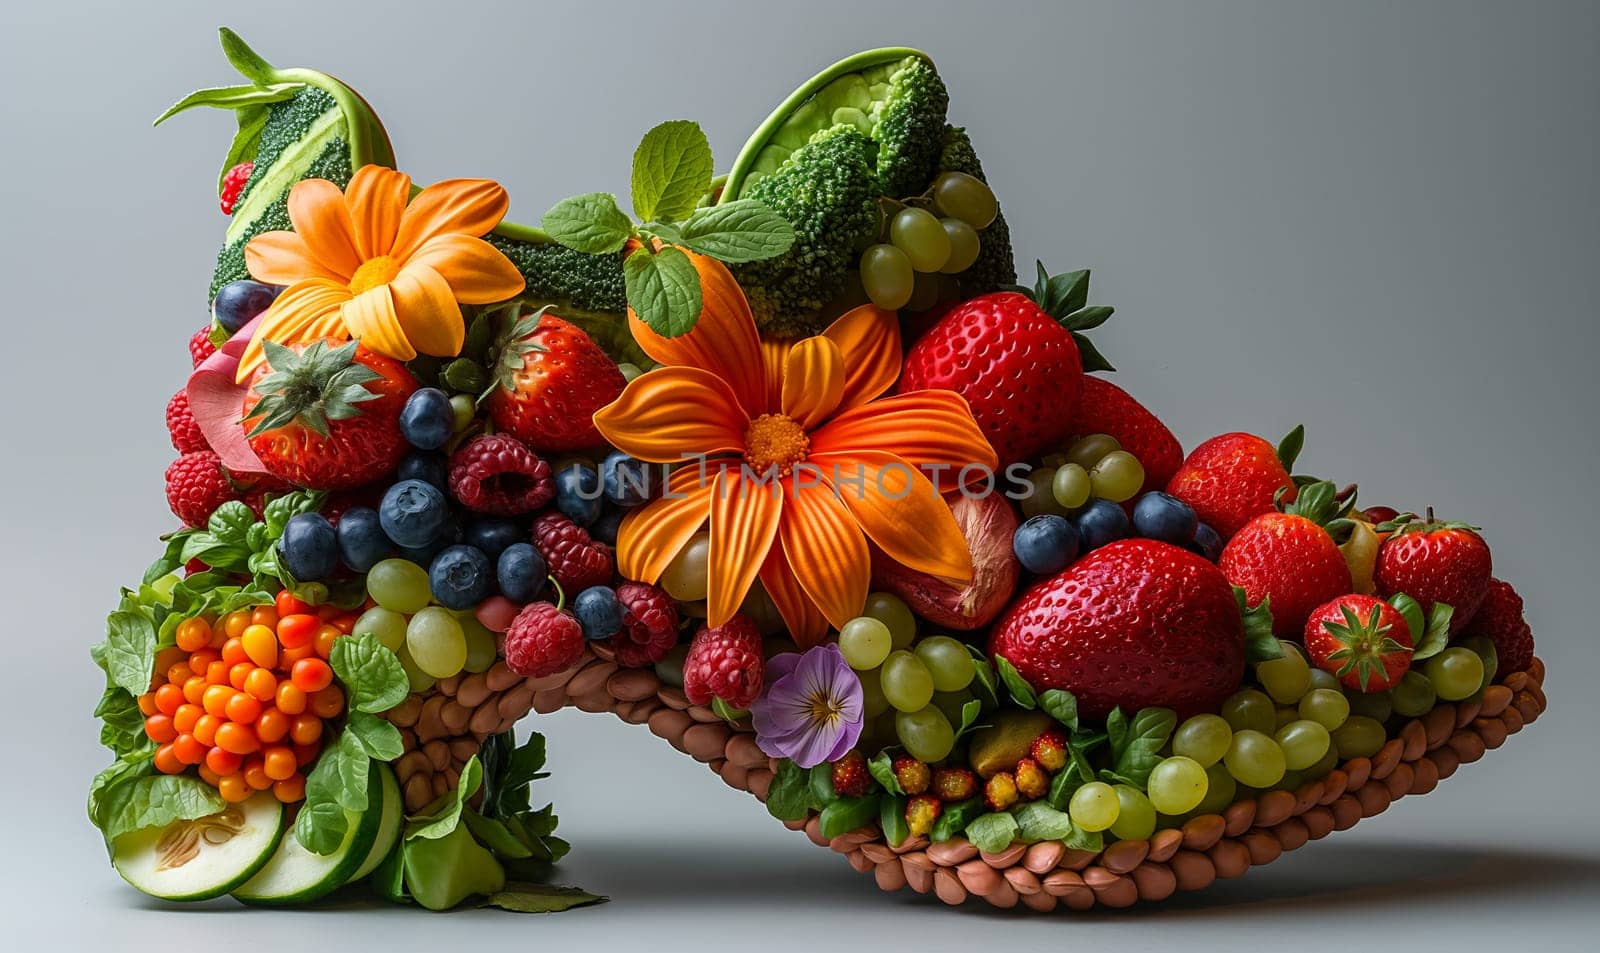 Shoes with fruits, berries and flowers. Selective focus